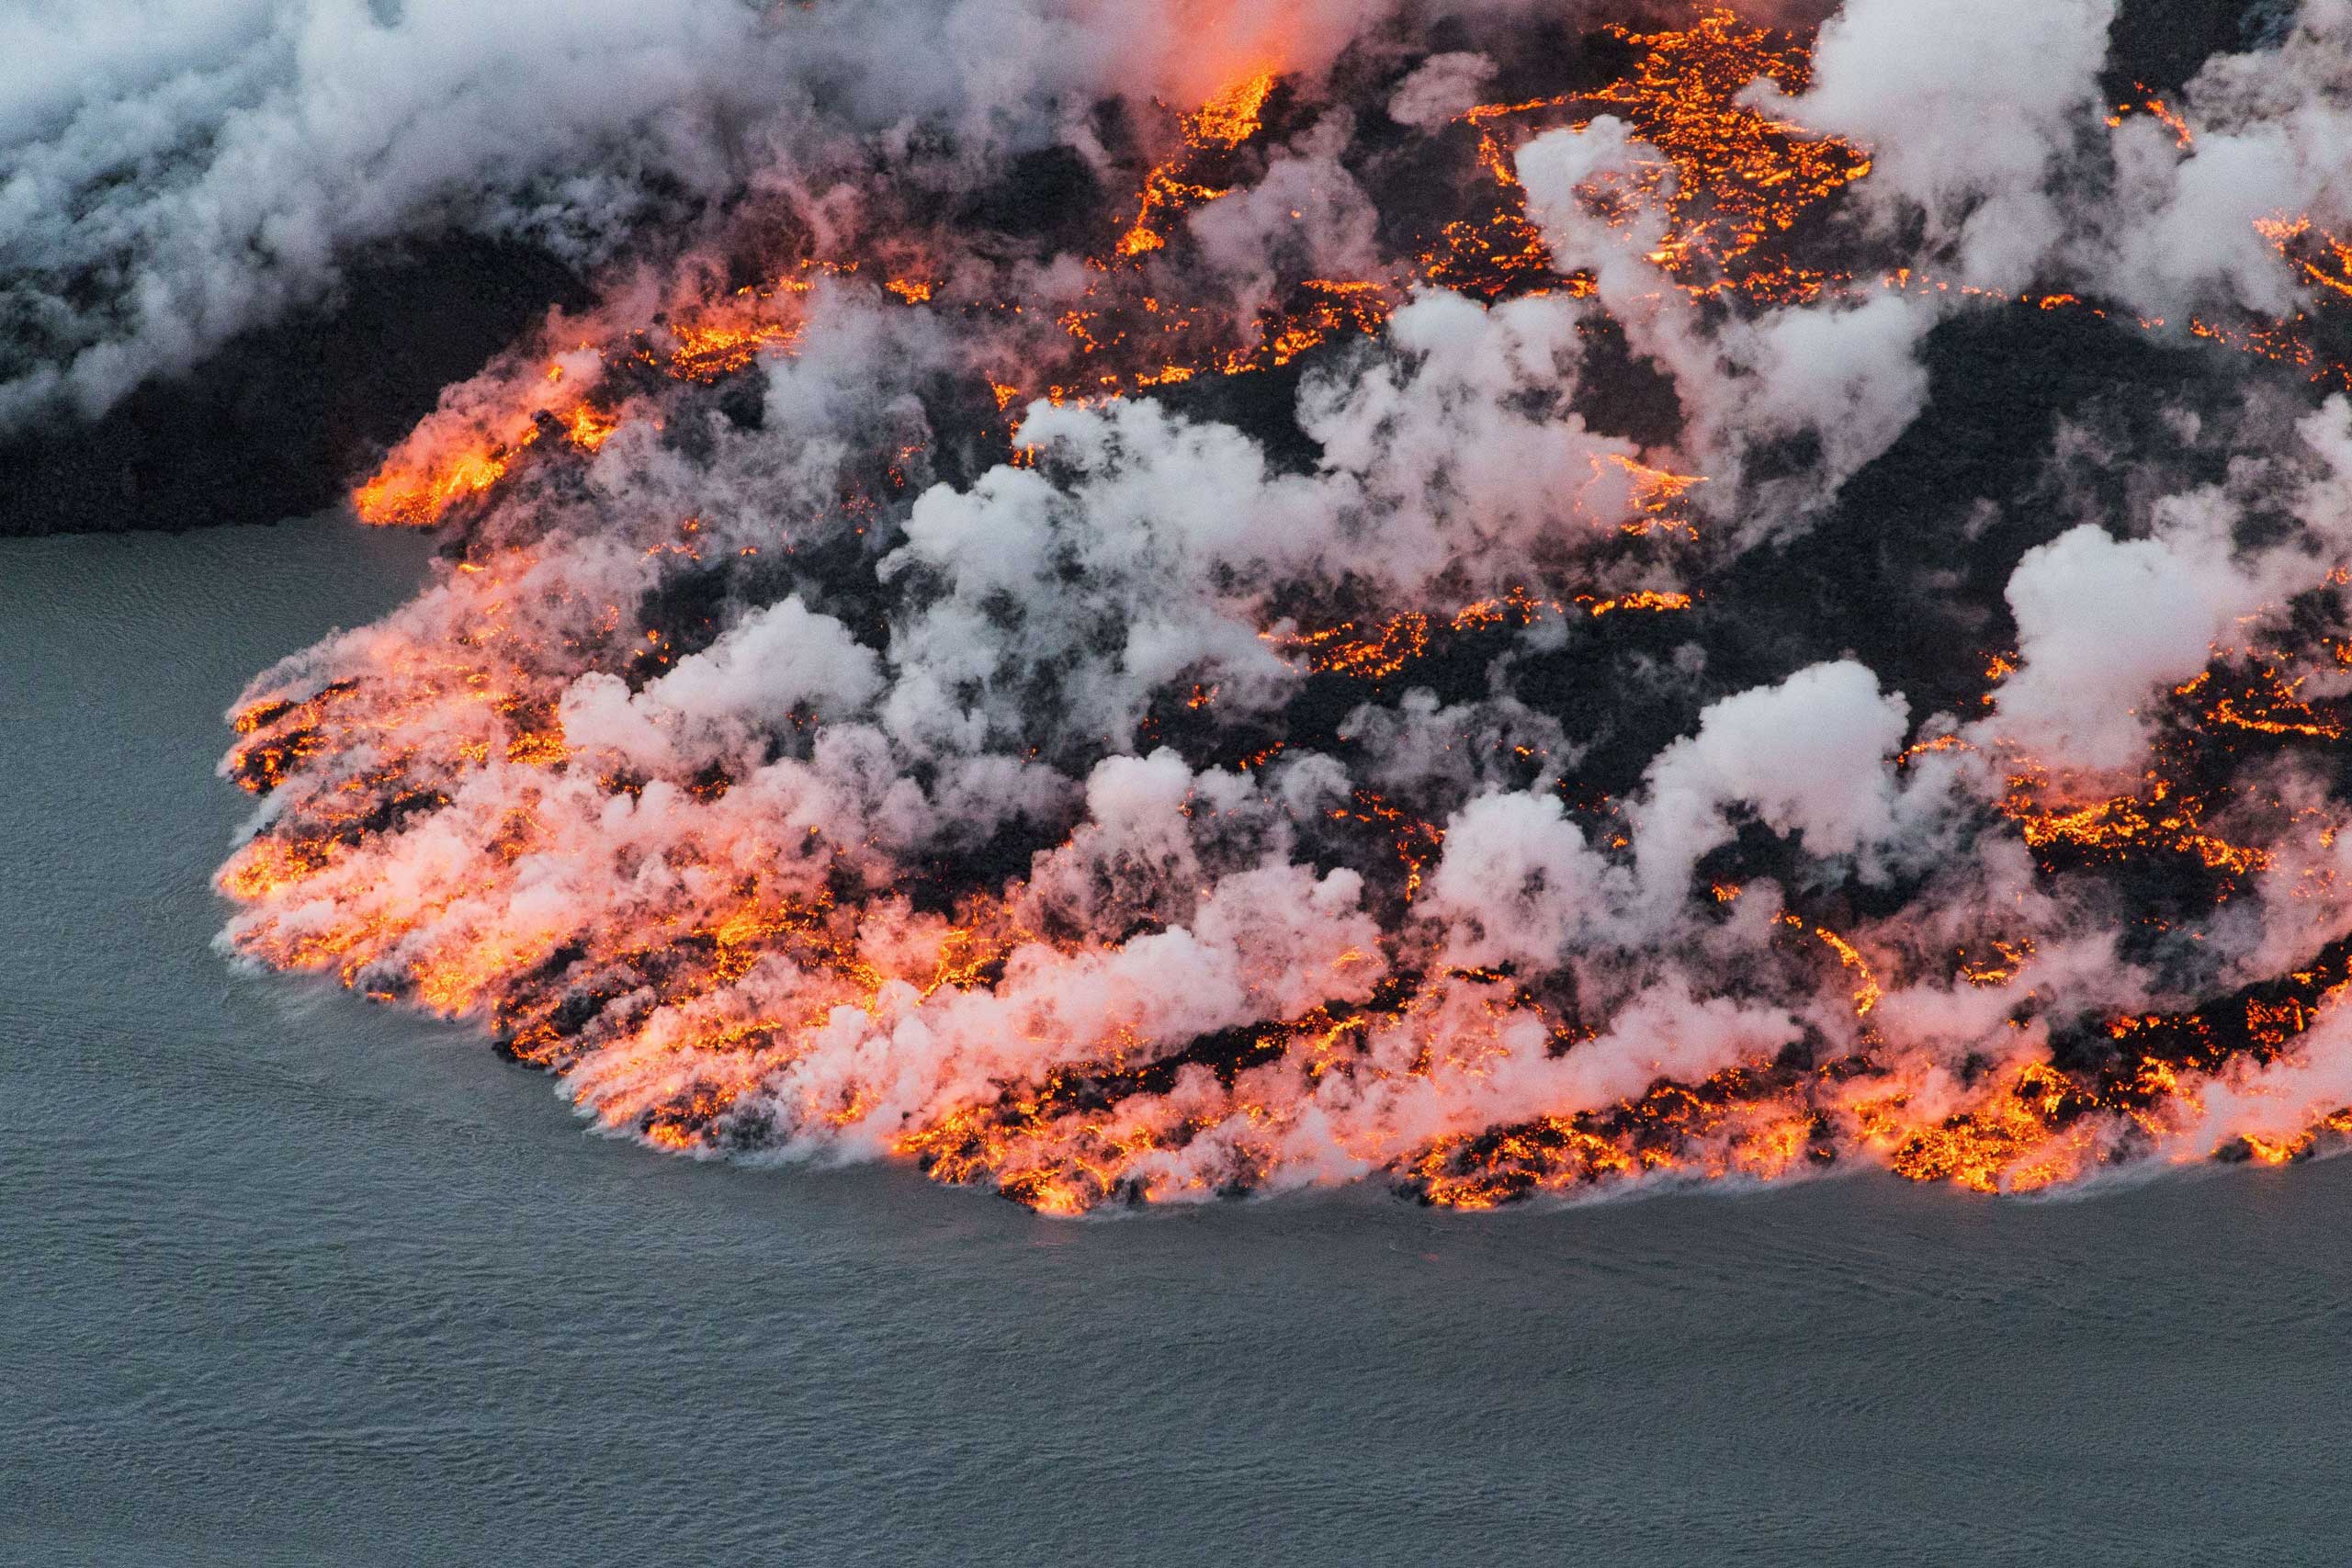 Sept. 14, 2014. An aerial picture shows lava flowing out of the Bardarbunga volcano in southeast Iceland.